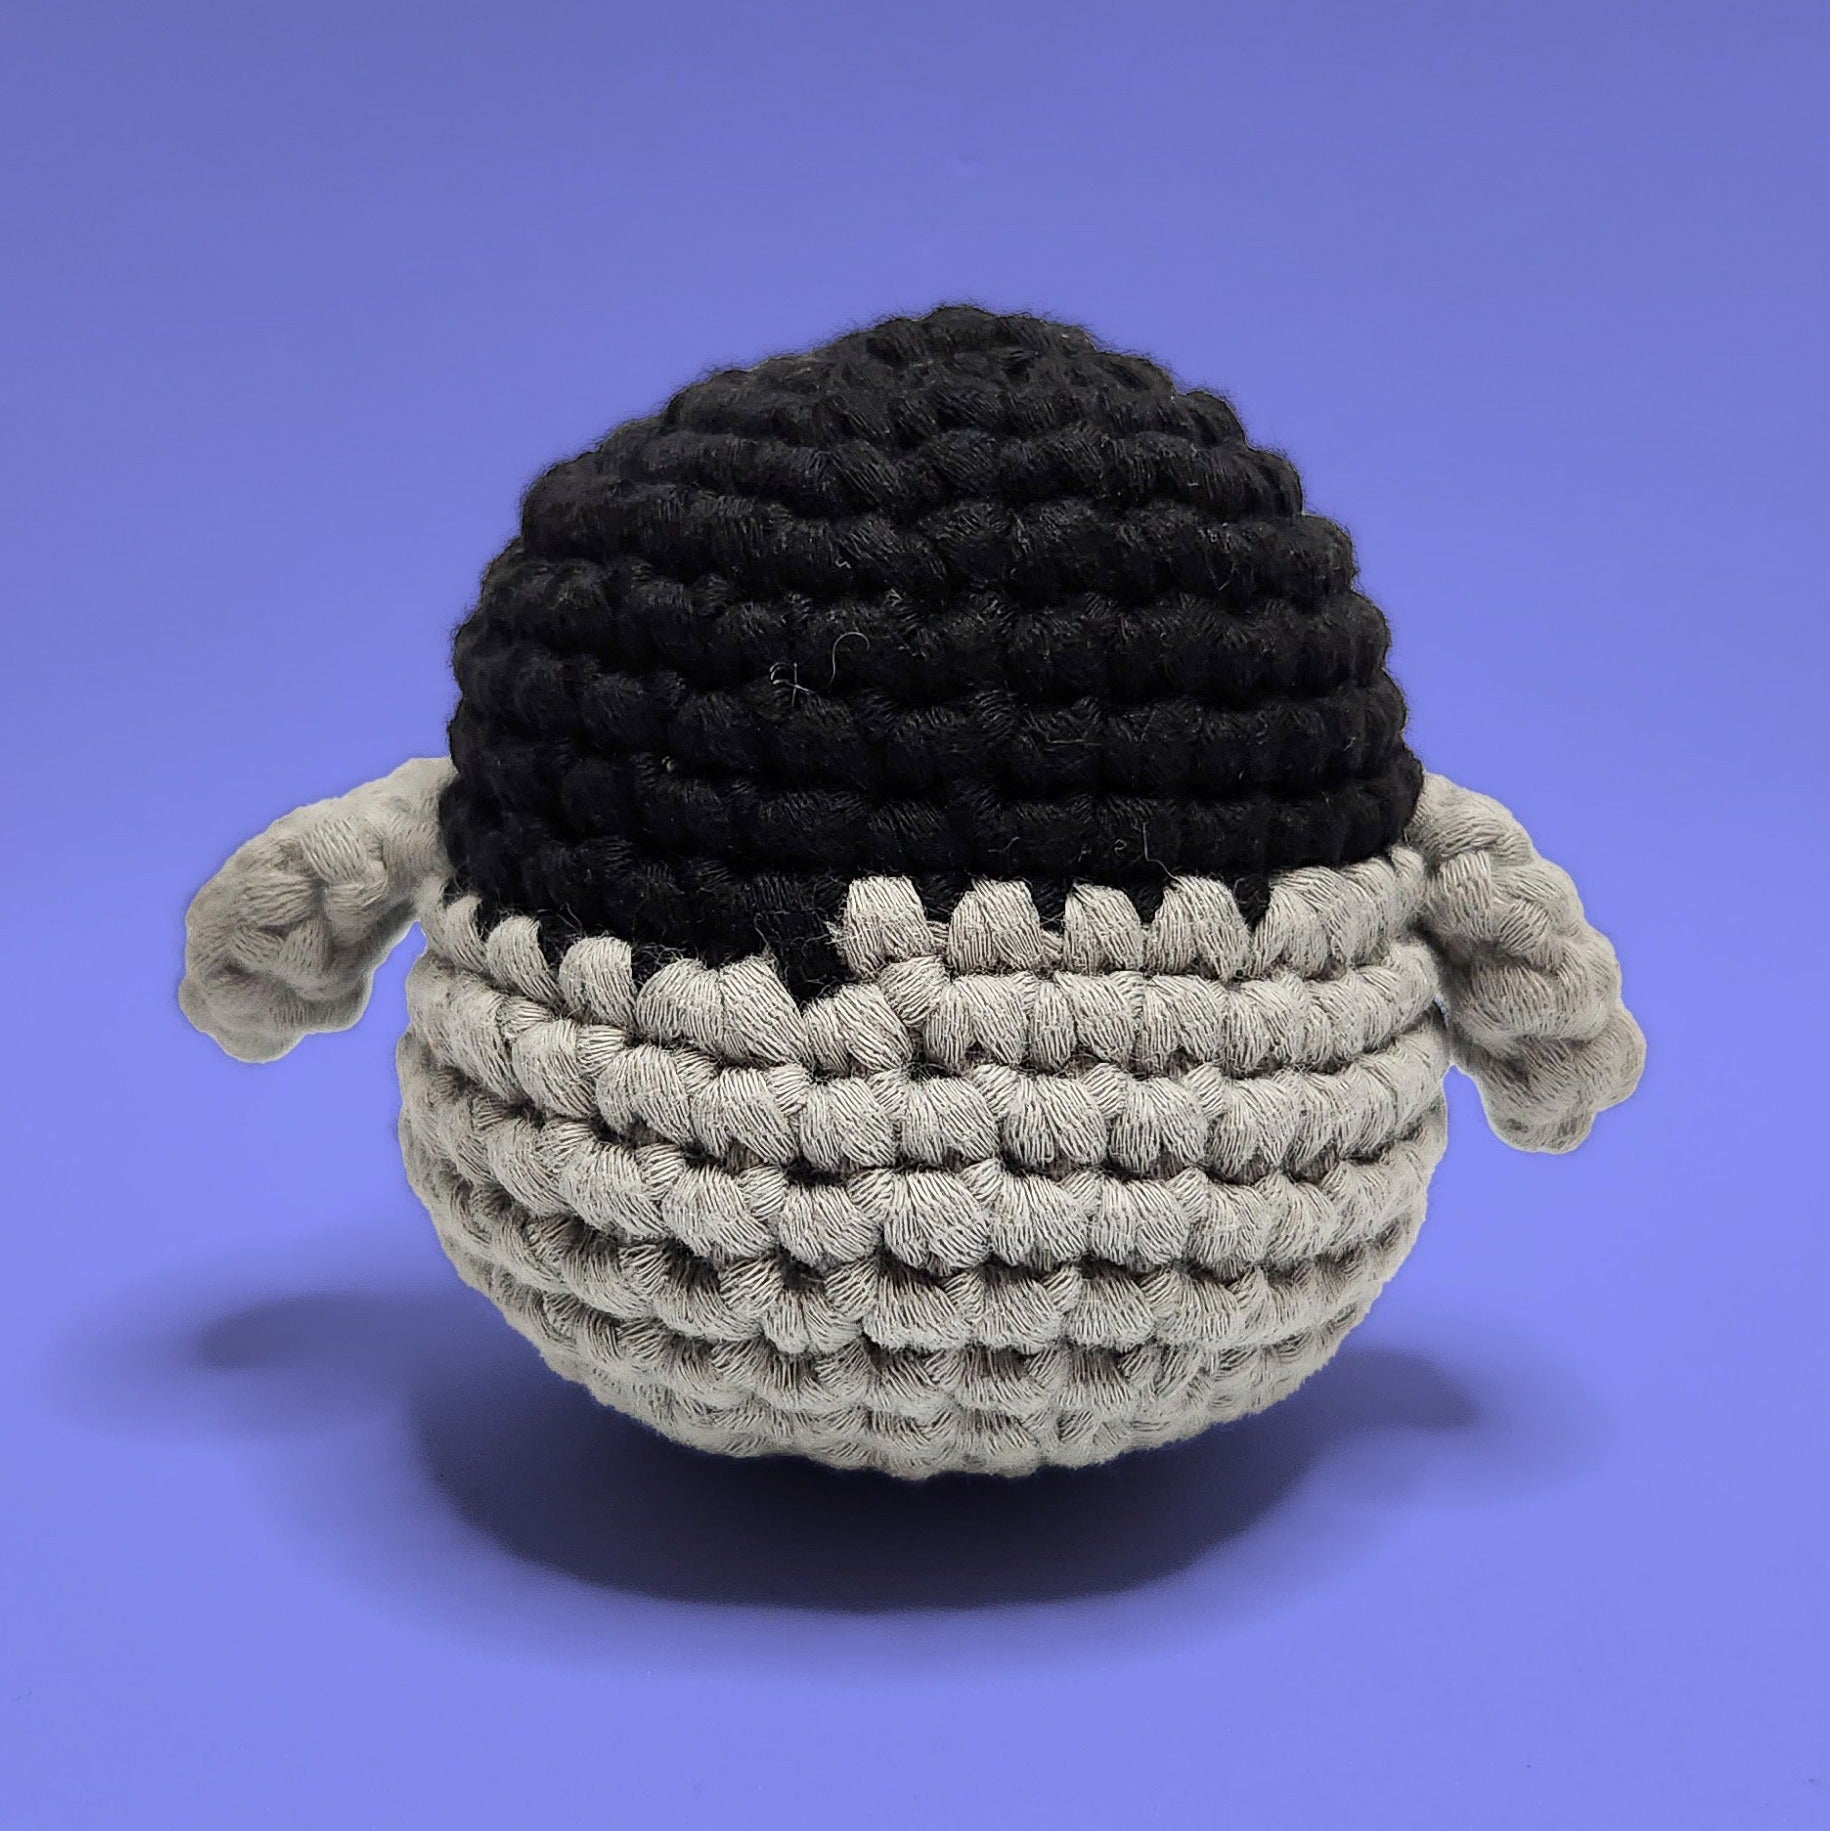 Lola the black, grey and white penguin crochet amigurumi, handmade with love. This adorable penguin with yellow legs is perfect for bringing joy and cheer. Back view, ideal for crochet enthusiasts and penguin lovers.